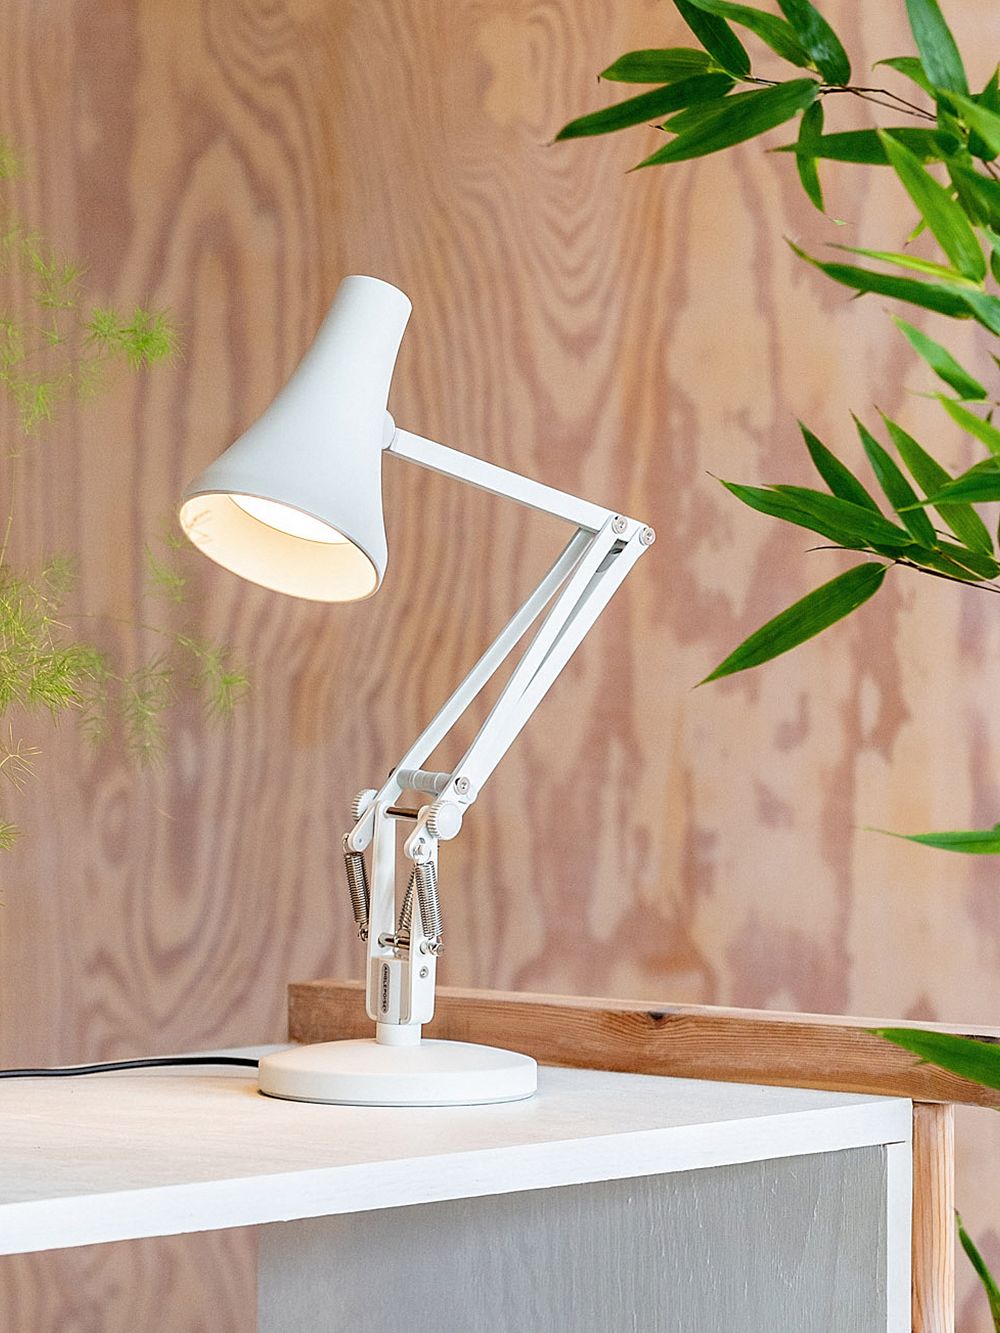 An image of Anglepoise's 90 Mini Mini table lamp in jasmine white on a table, as part of the home office decor.